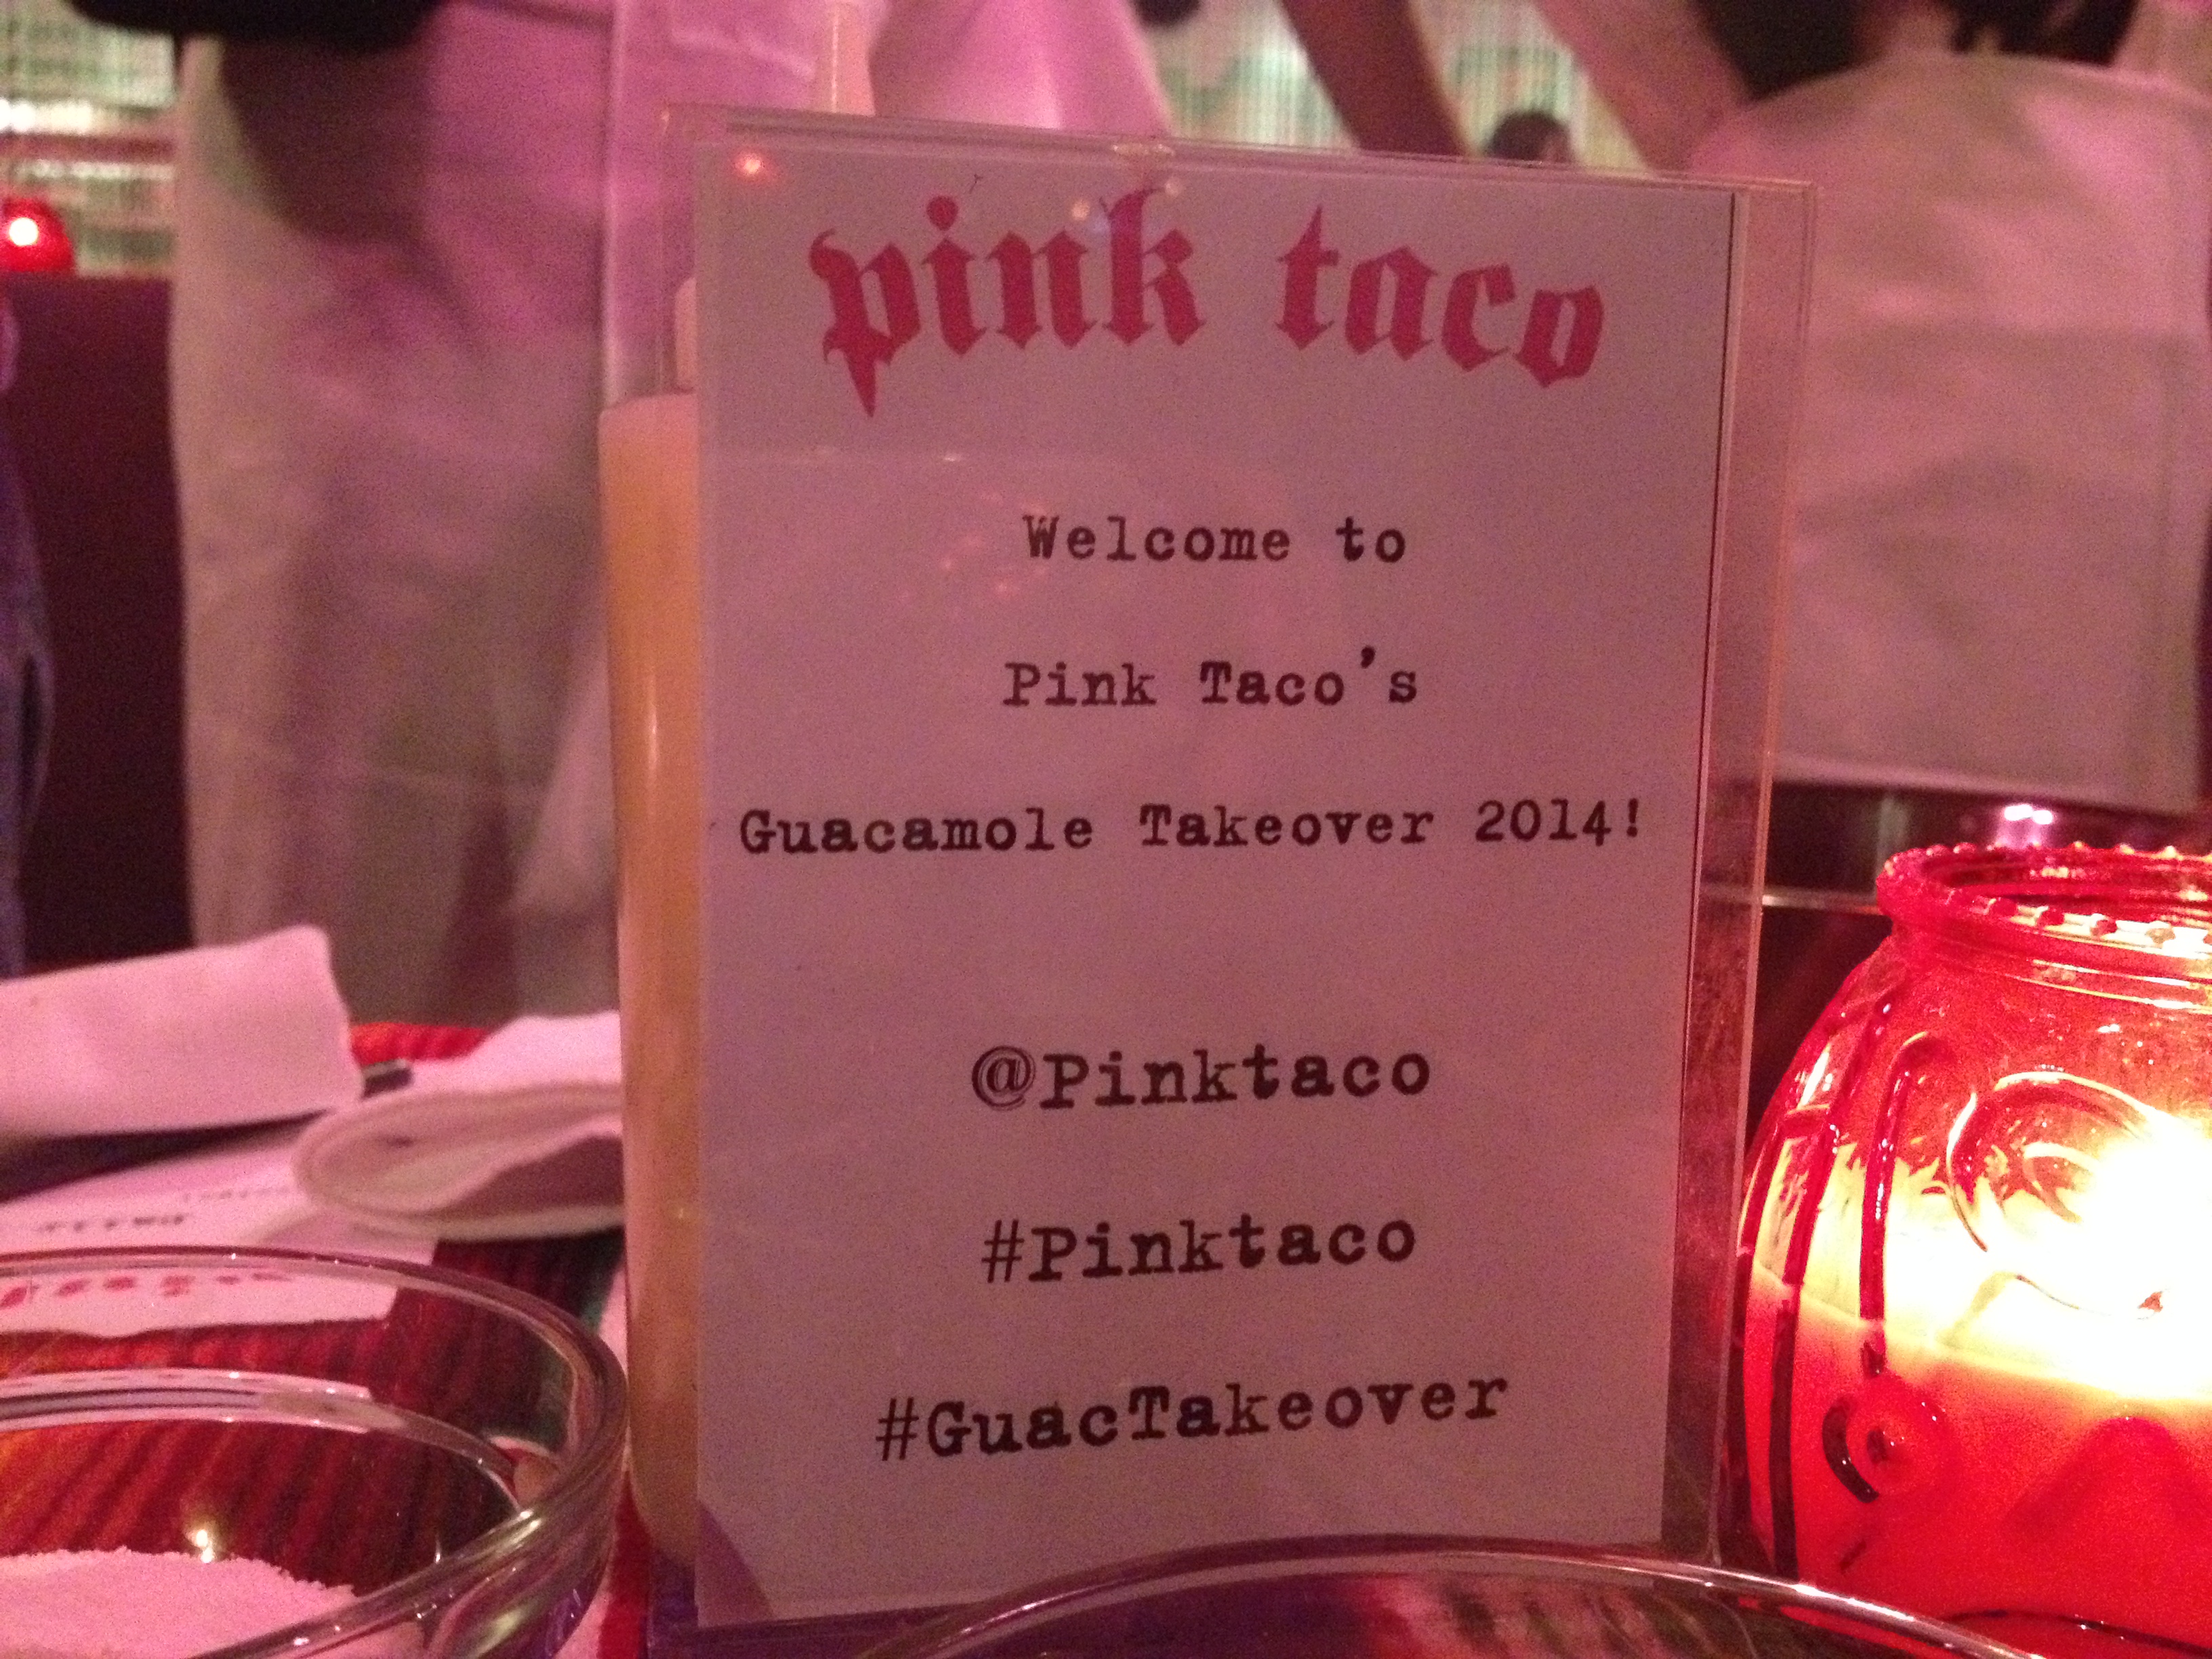 Pink Taco #GuacTakeover